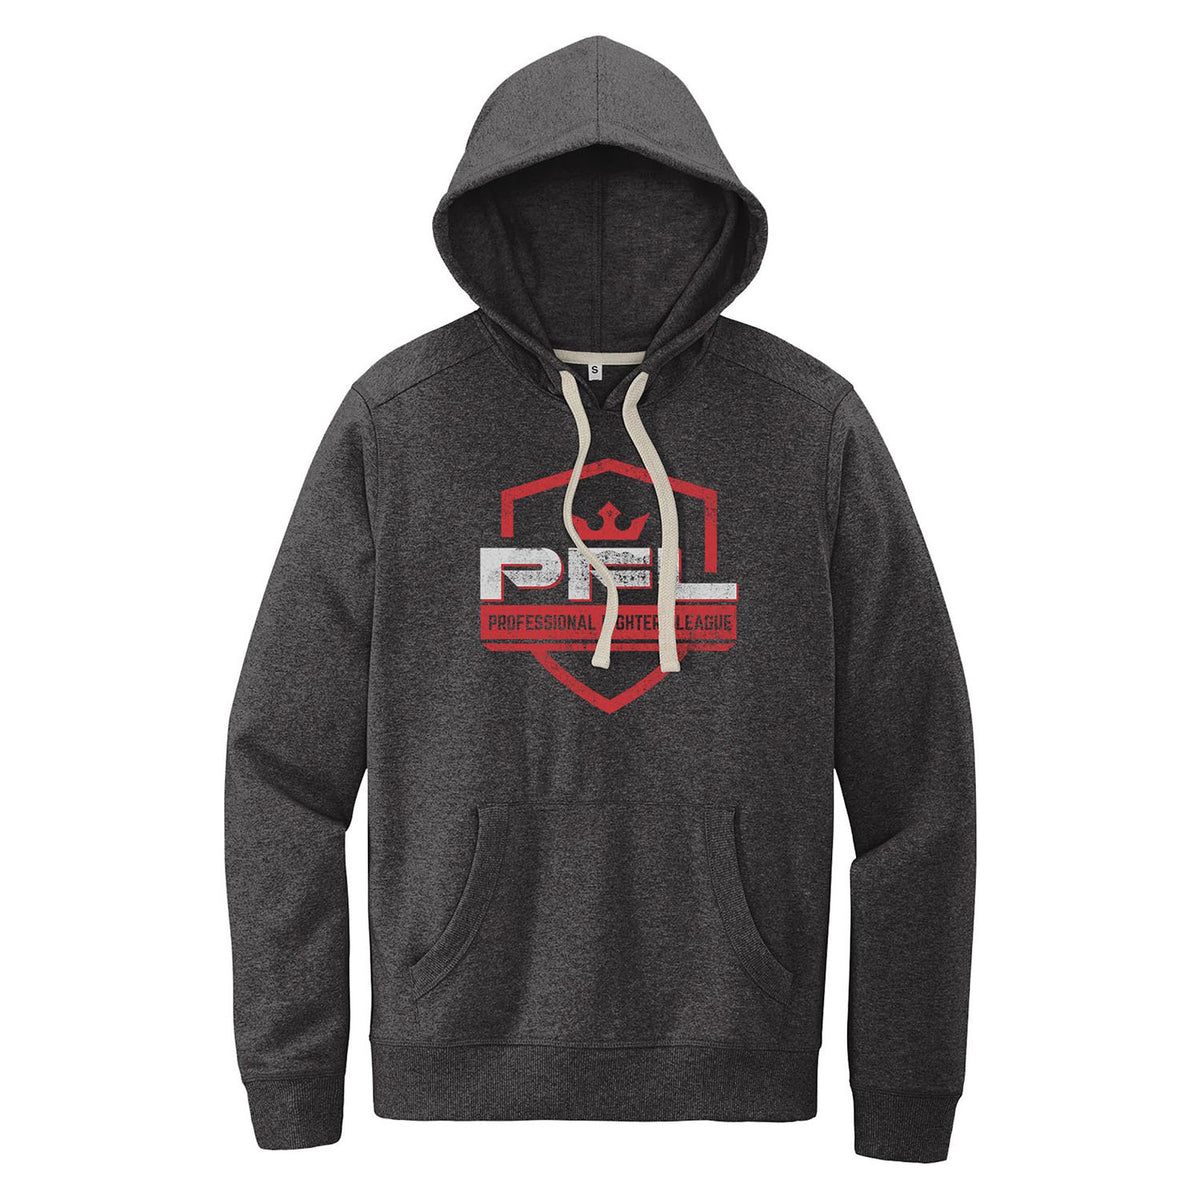 PFL Distressed Logo Hoodie in Charcoal Heather - Front View